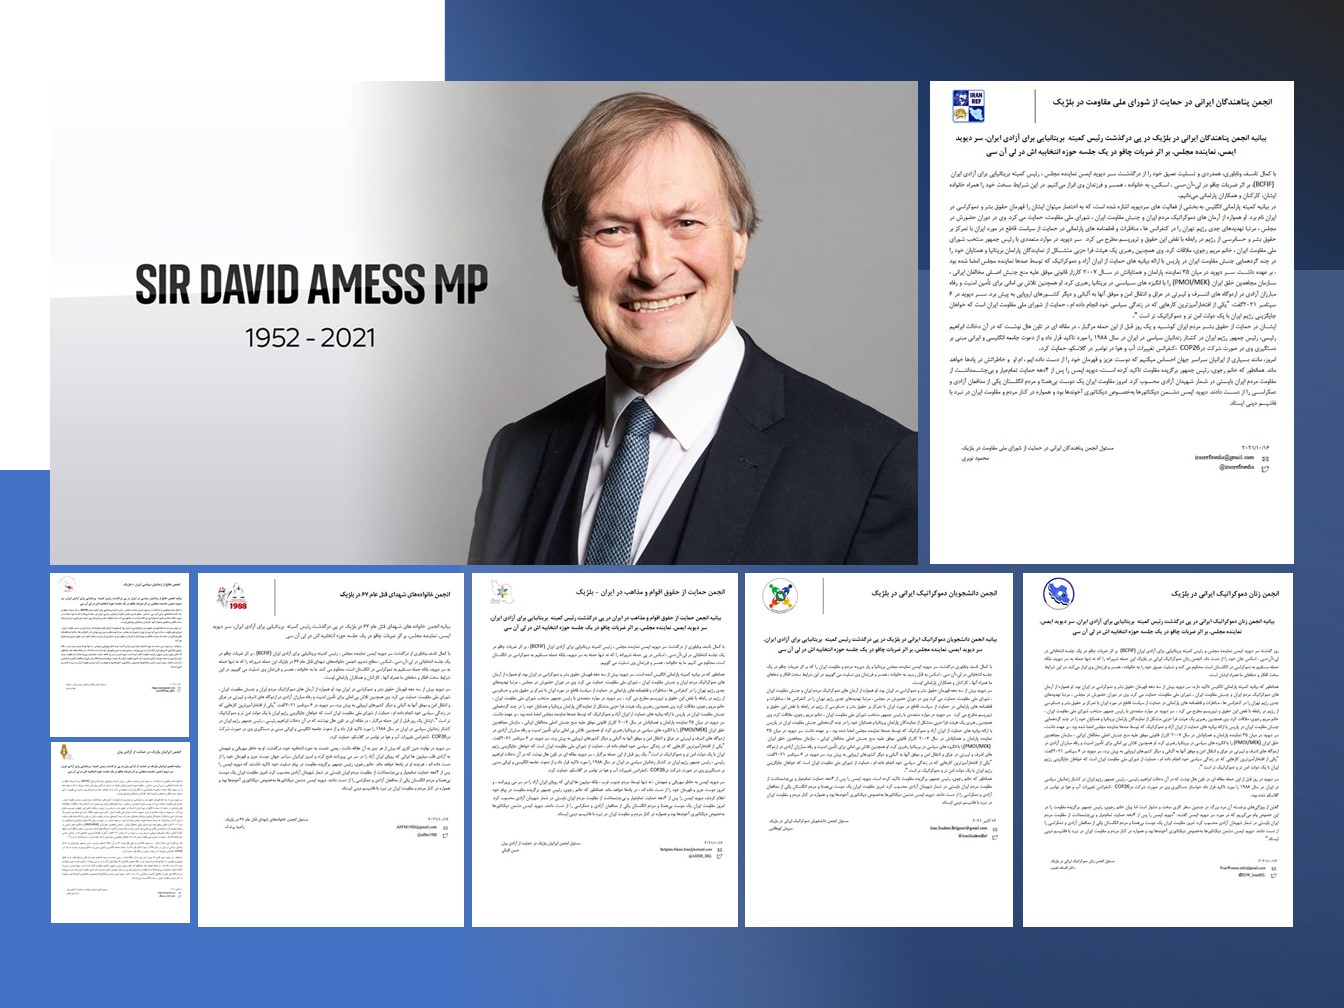 Iranian Community in Belgium statement following the passing of the co-chairman of the British Committee for Iran Freedom, Sir David Amess MP,